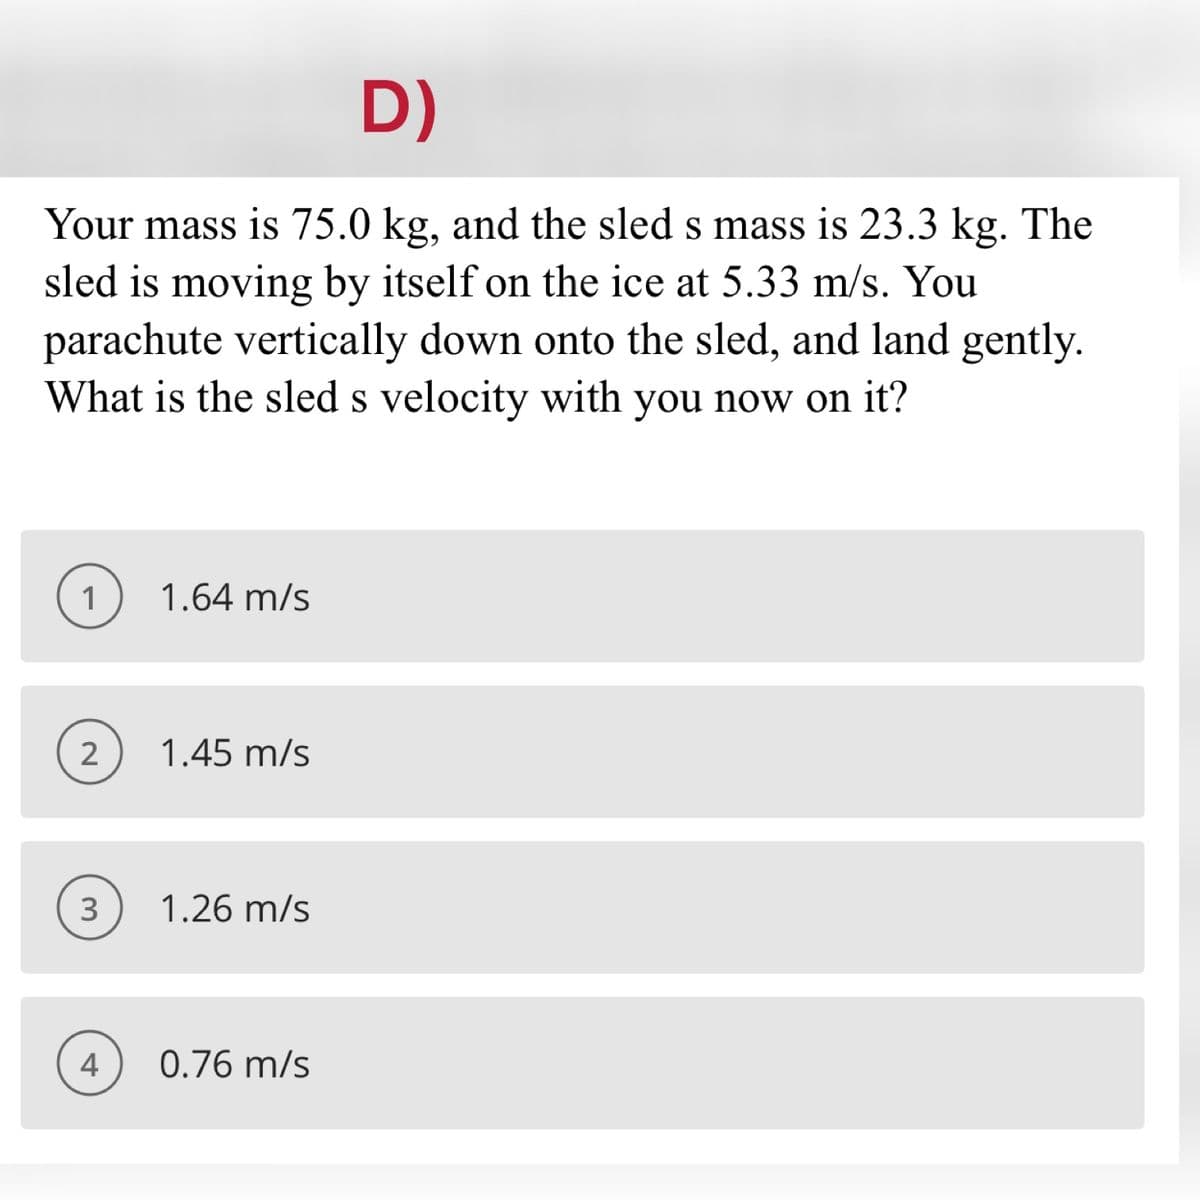 D)
Your mass is 75.0 kg, and the sled s mass is 23.3 kg. The
sled is moving by itself on the ice at 5.33 m/s. You
parachute vertically down onto the sled, and land gently.
What is the sled s velocity with you now on it?
1
1.64 m/s
1.45 m/s
3
1.26 m/s
4
0.76 m/s
2.
